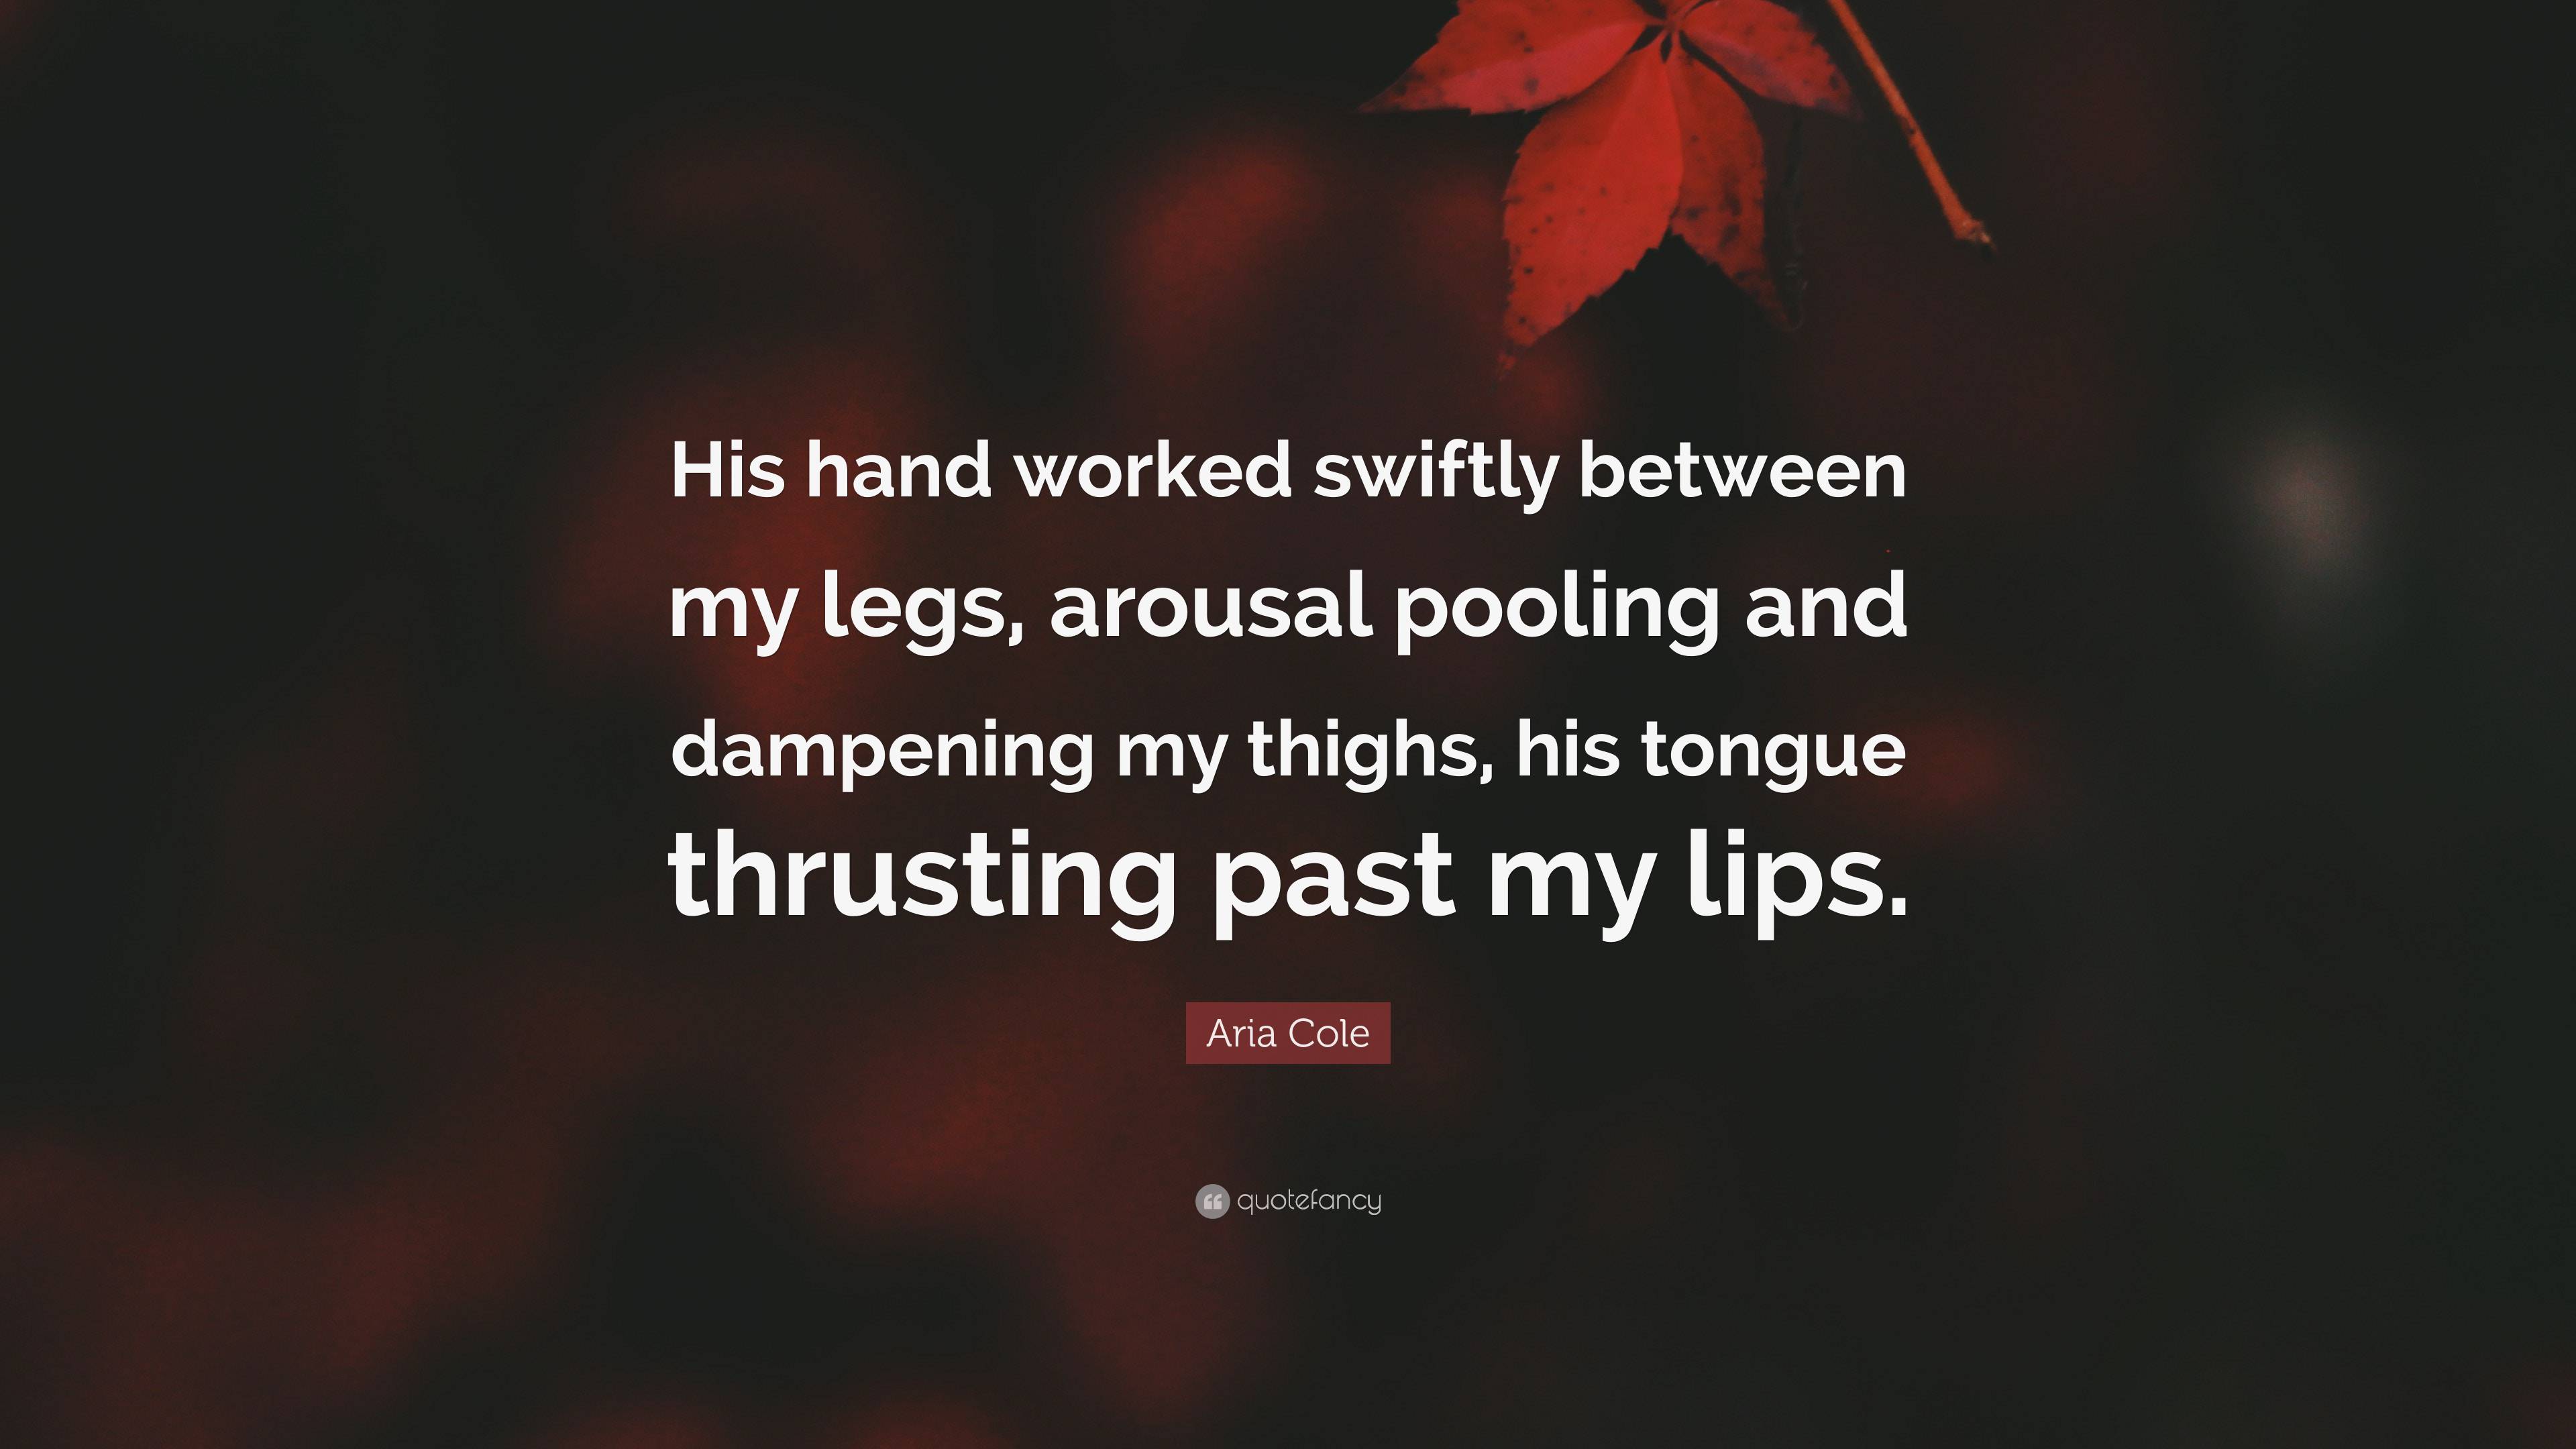 Aria Cole Quote: “His hand worked swiftly between my legs, arousal